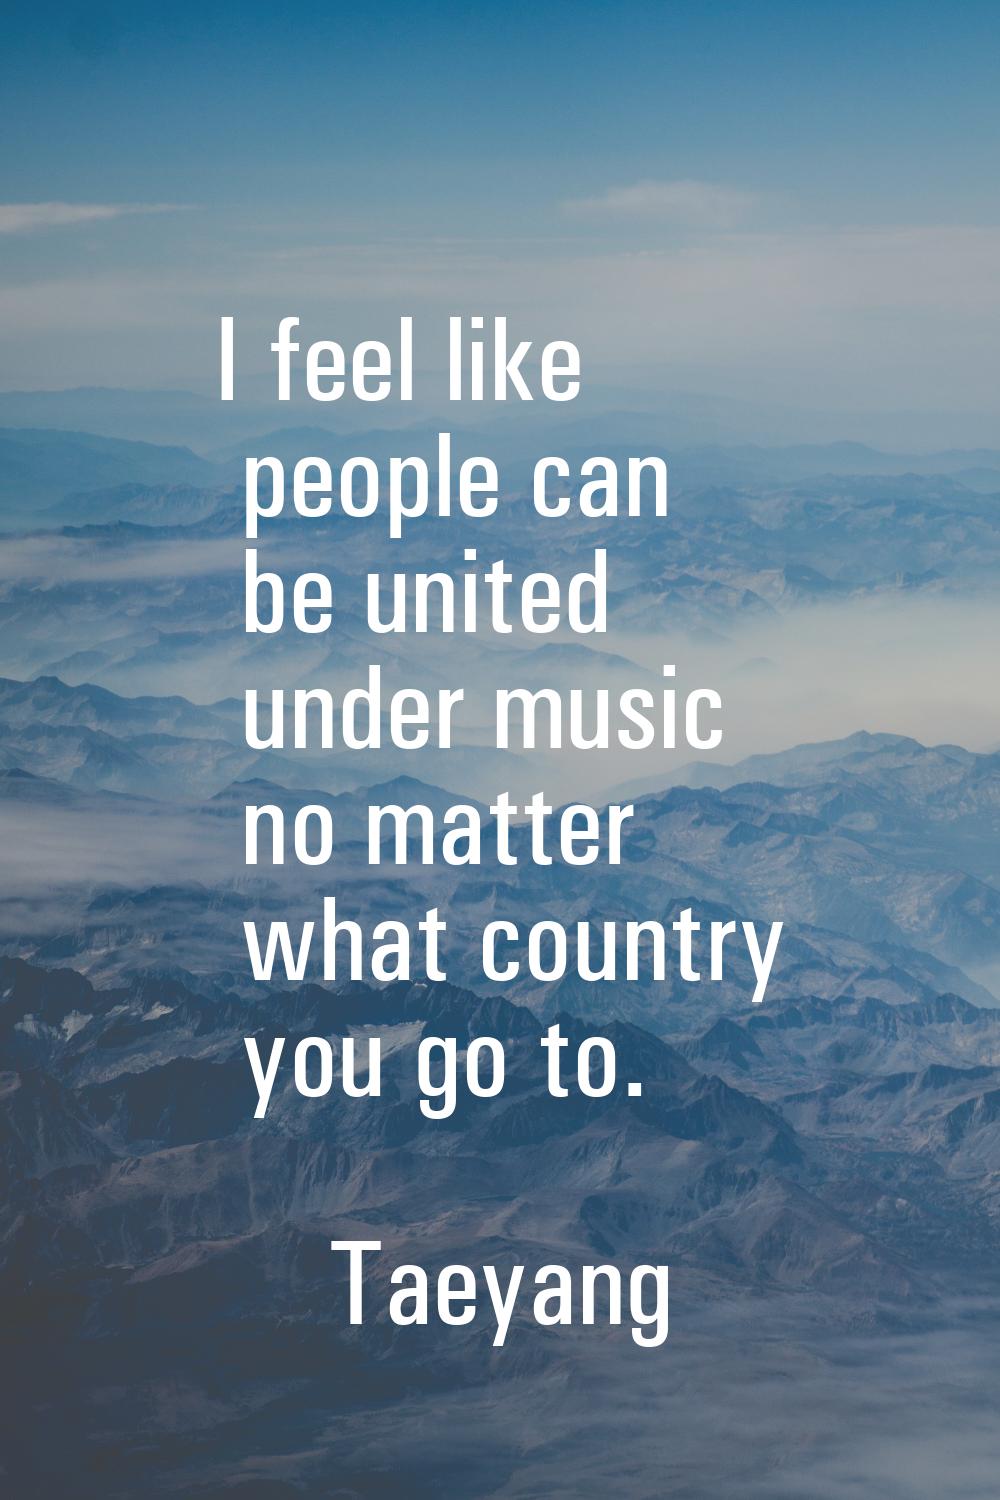 I feel like people can be united under music no matter what country you go to.